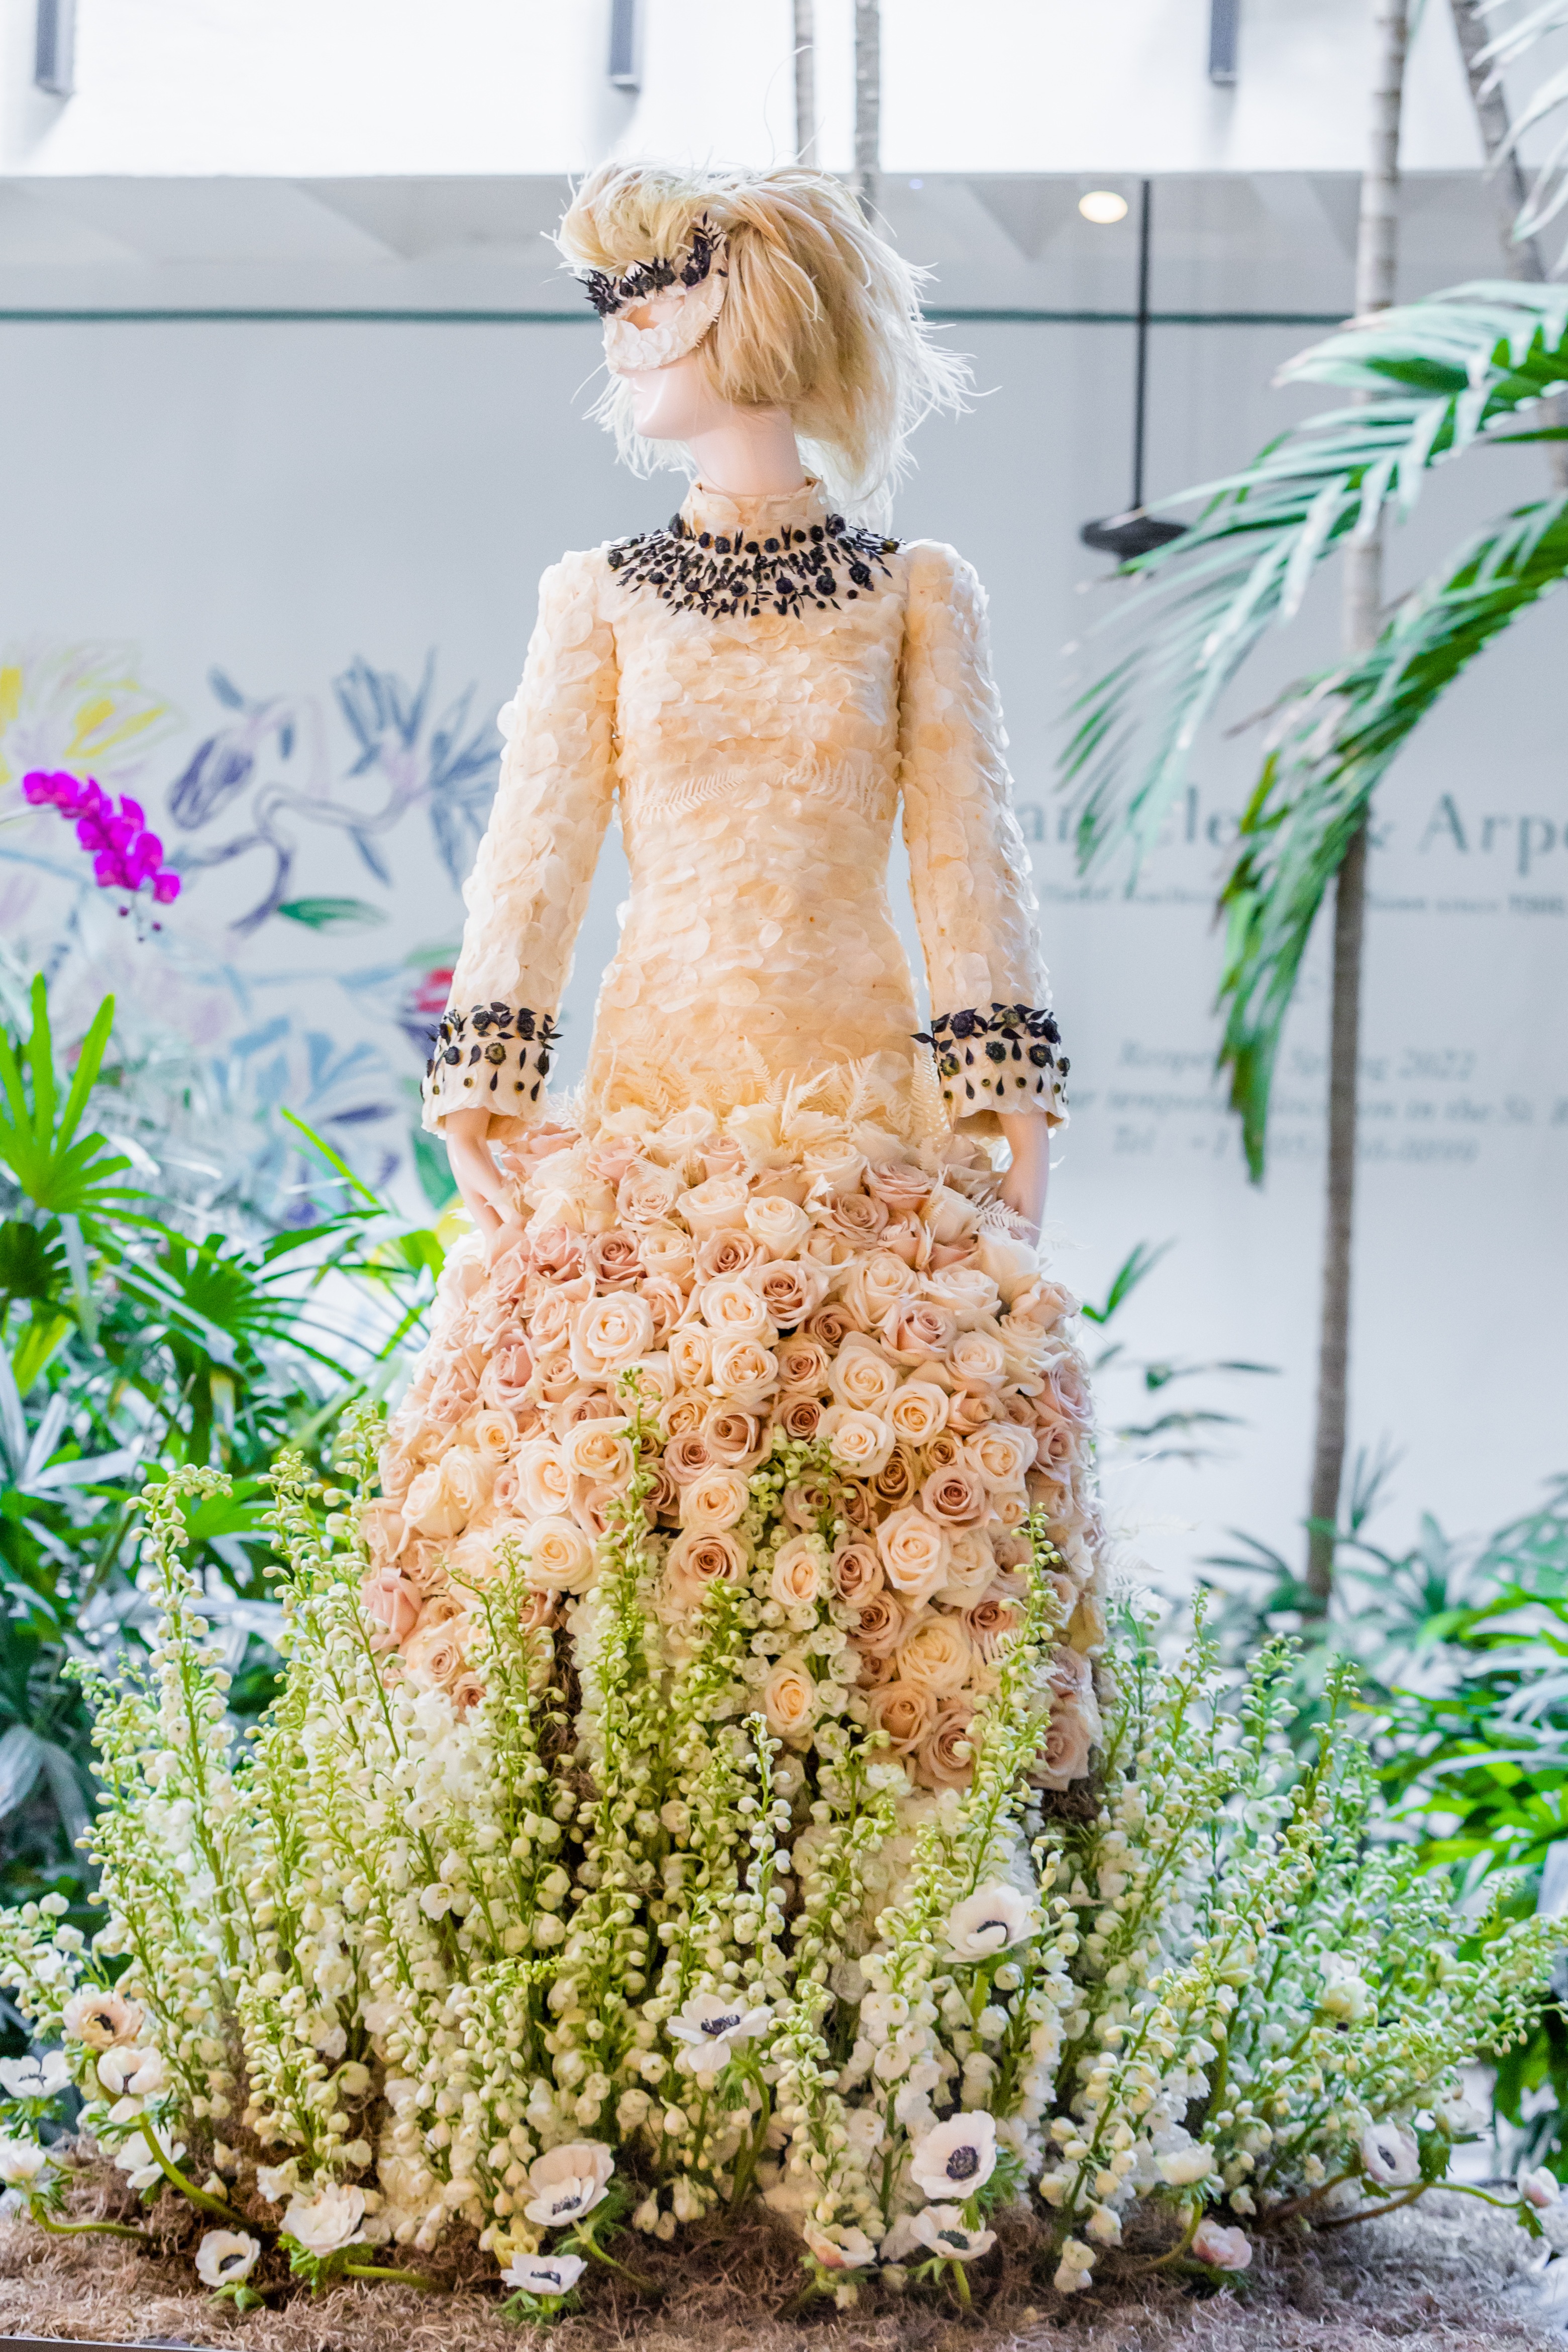 Floral mannequin inspired by Katherine Graham